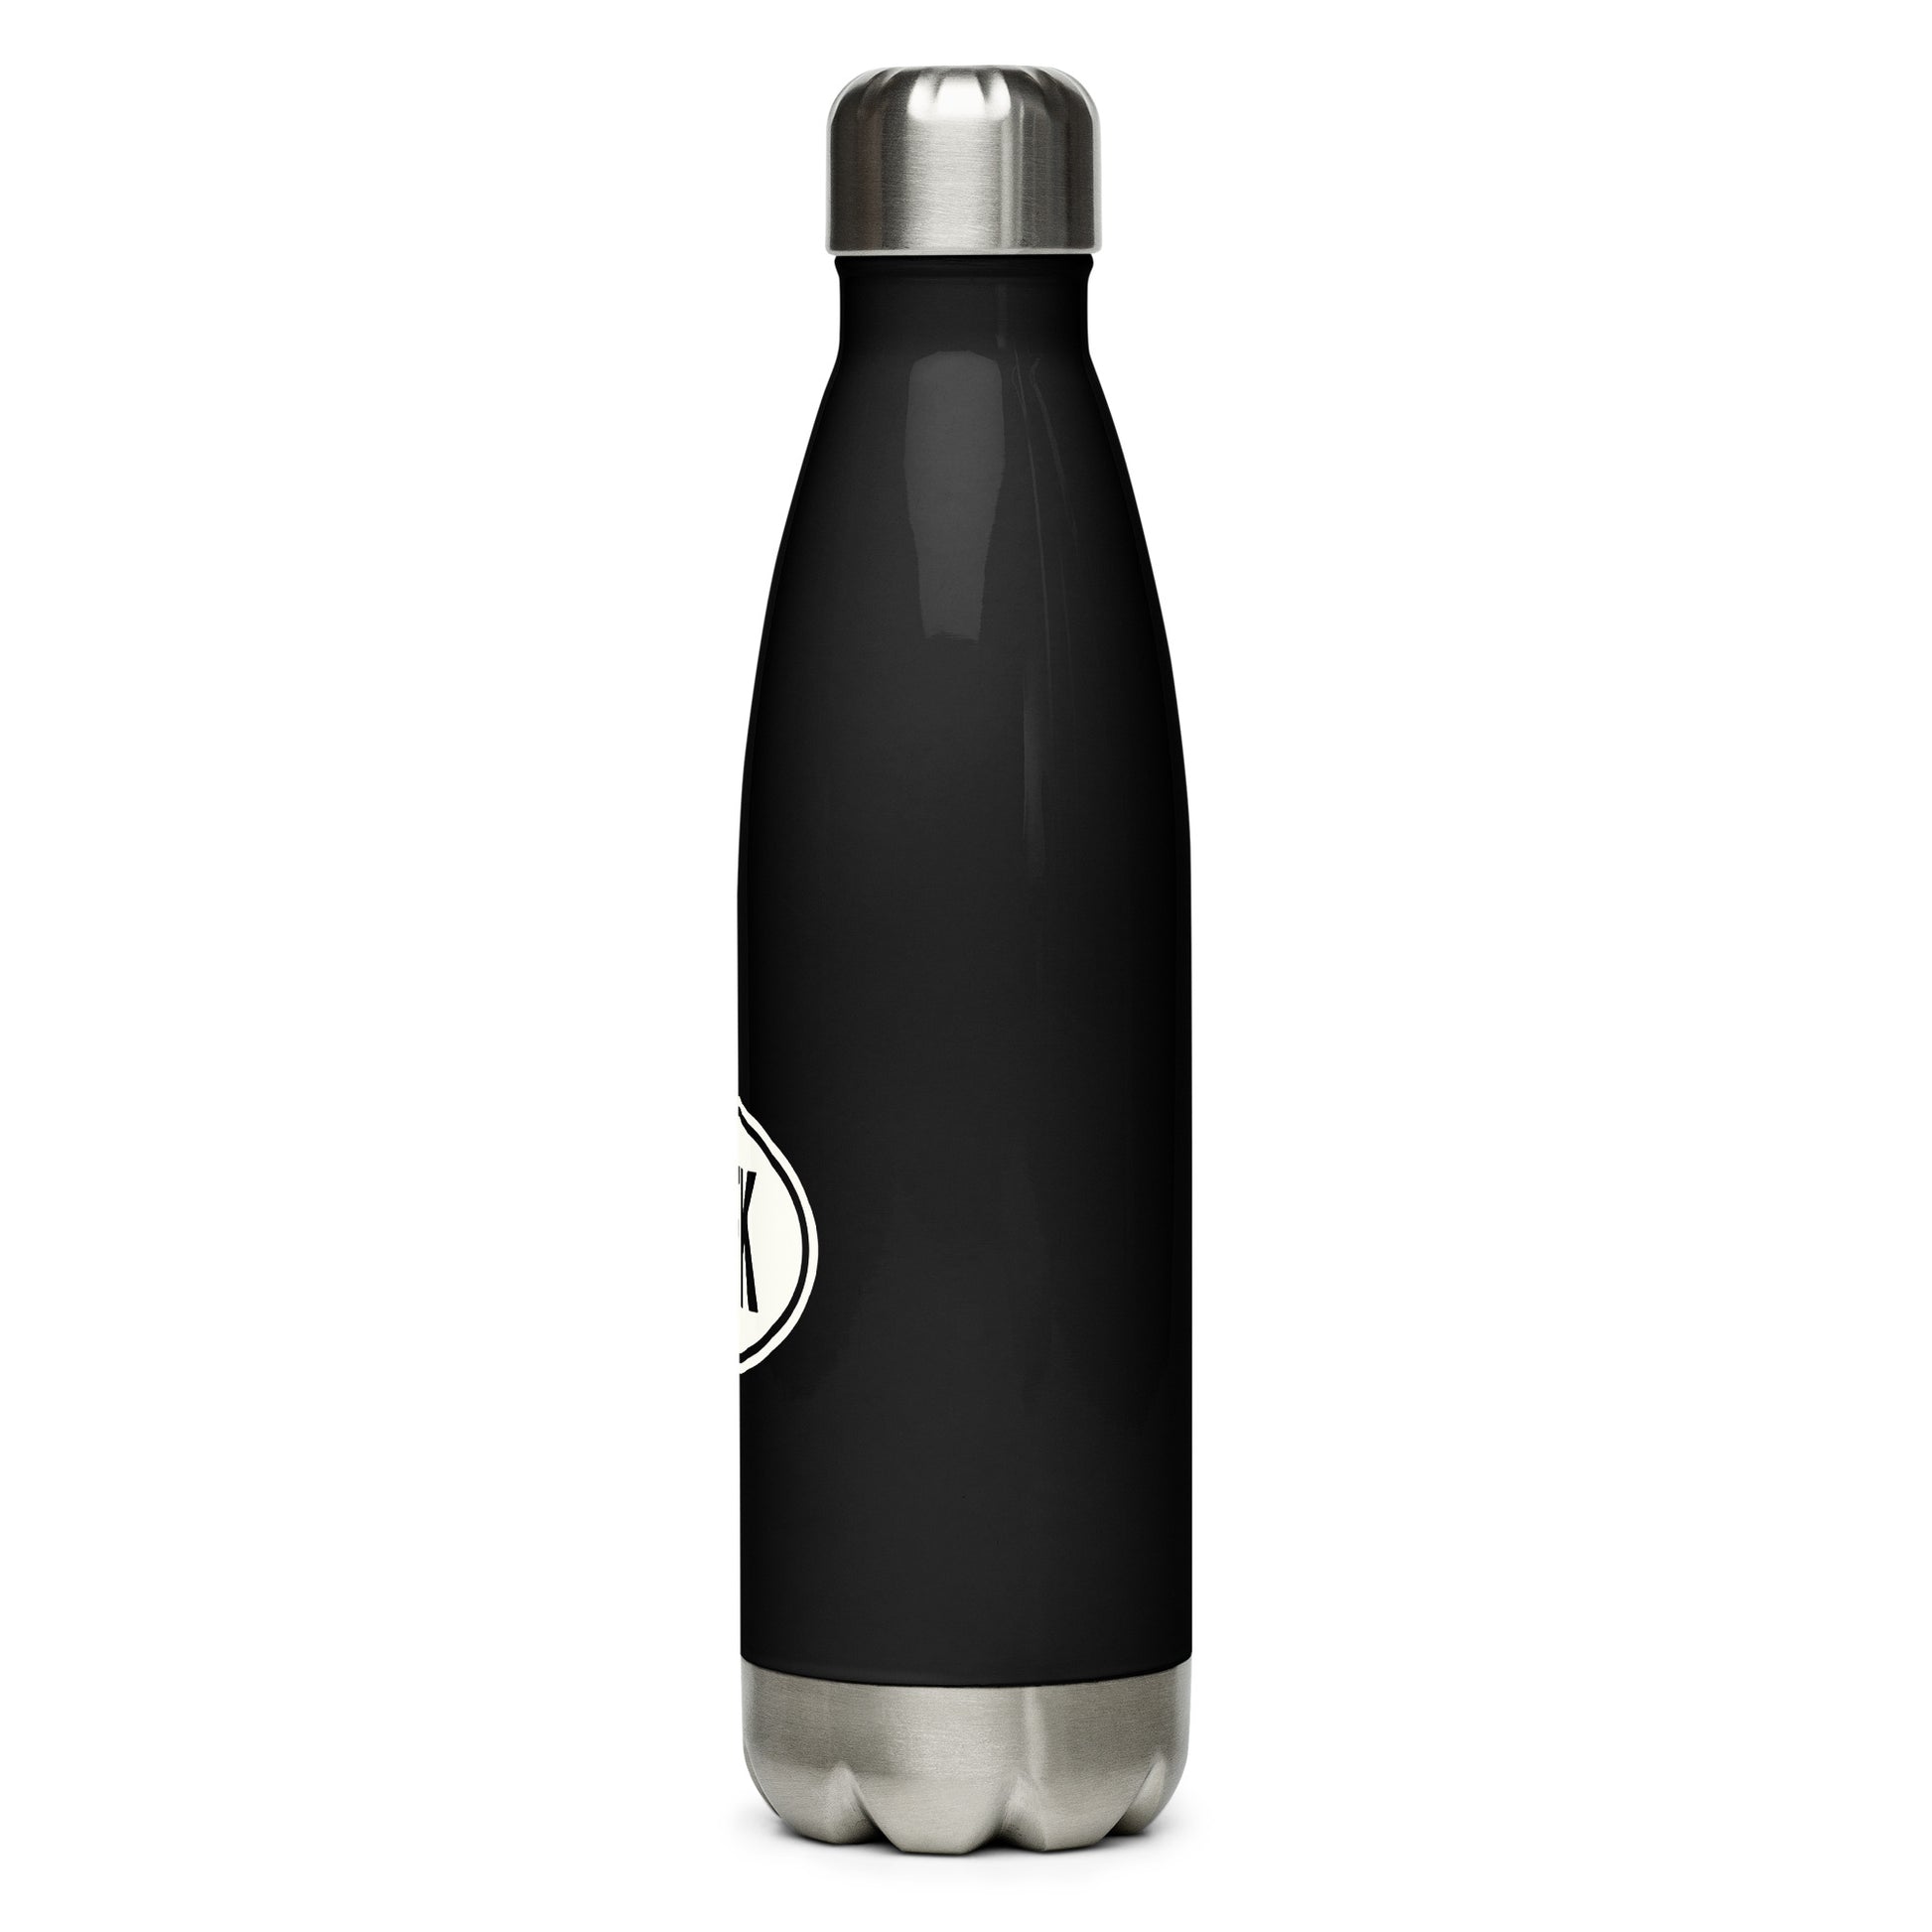 Unique Travel Gift Water Bottle - White Oval • JFK New York City • YHM Designs - Image 06